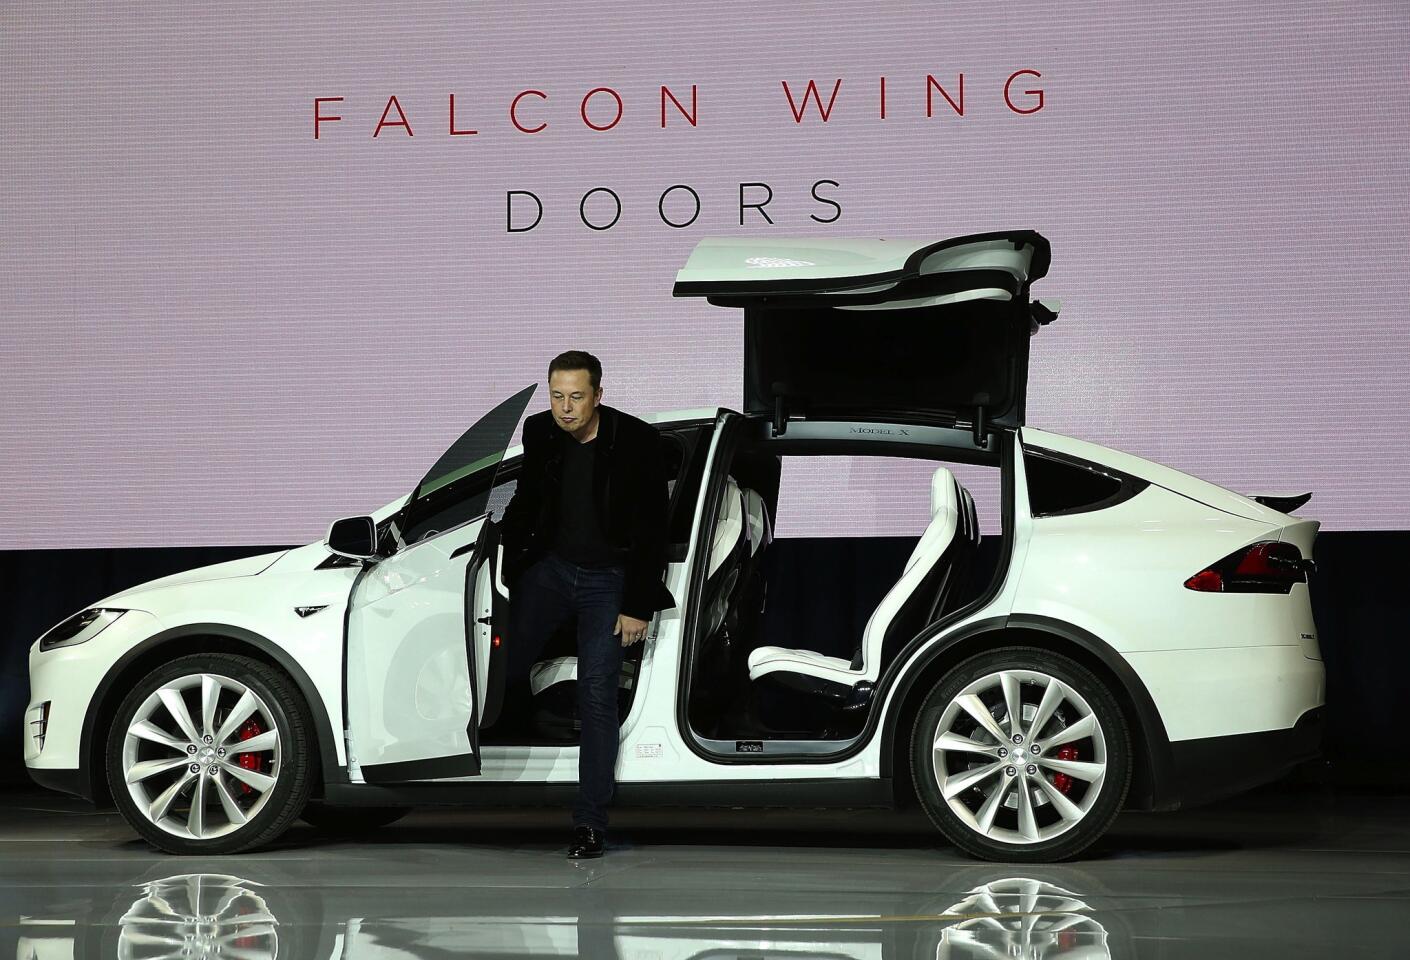 Tesla CEO Elon Musk demonstrates the falcon wing doors on the new Tesla Model X Crossover SUV during a launch event on September 29, 2015 in Fremont, California. After several production delays, Elon Musk officially launched the much anticipated all-electric Tesla Model X all-wheel-drive SUV. Read the first drive overview>>>